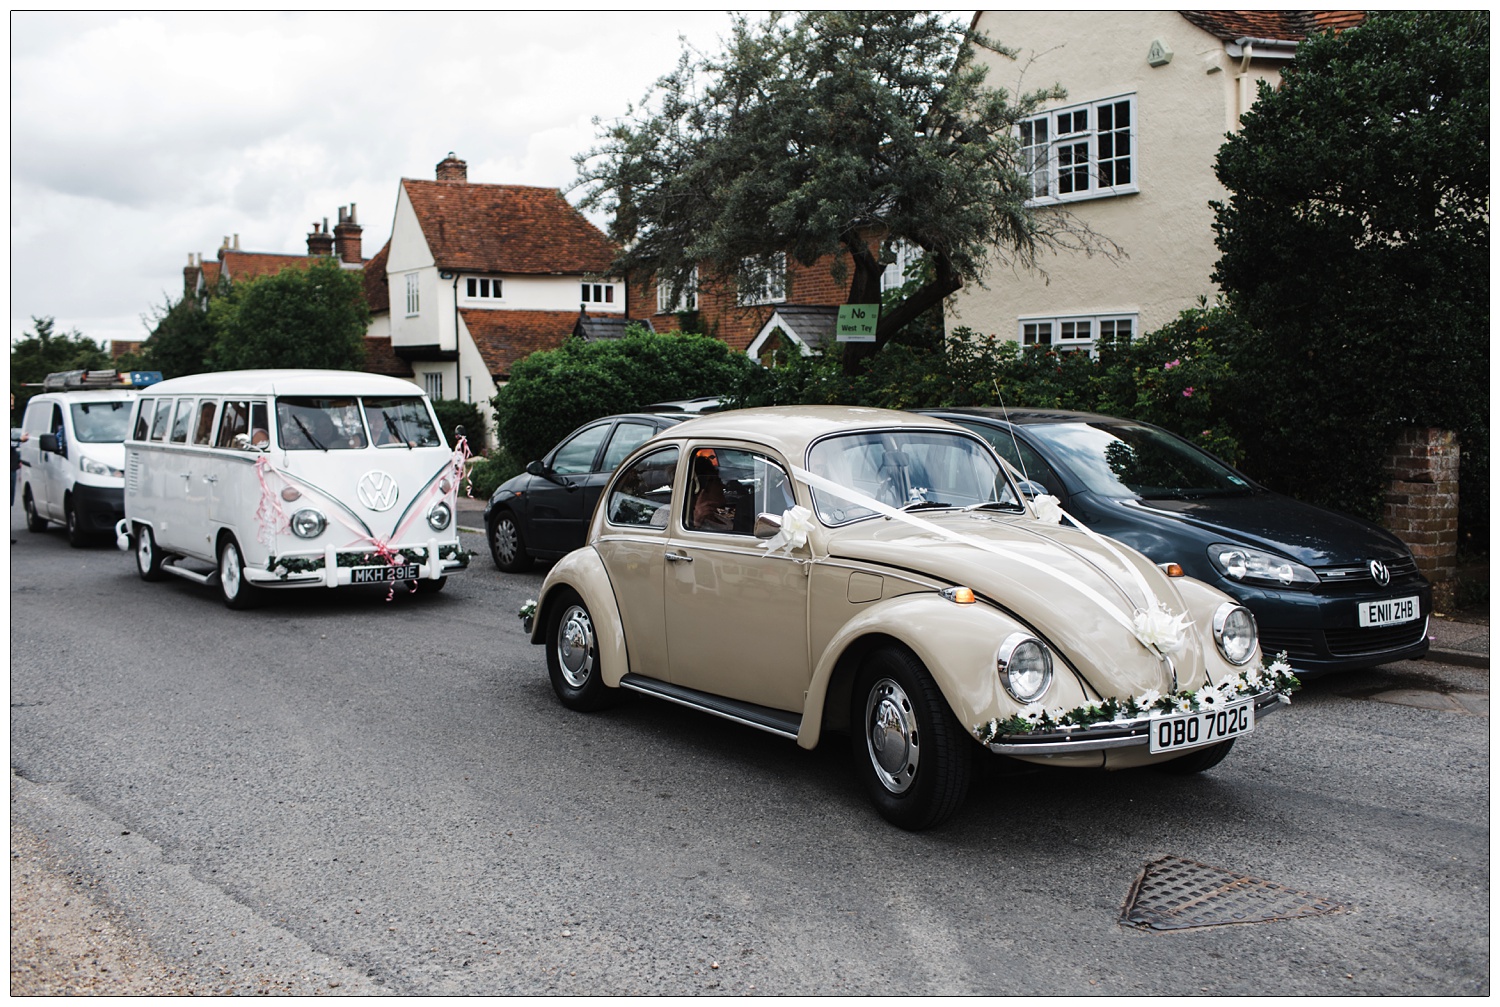 A beige 1968 Volkswagen Beetle and a 1967 white campervan taking the bride and bridesmaids to a wedding in Great Tey.